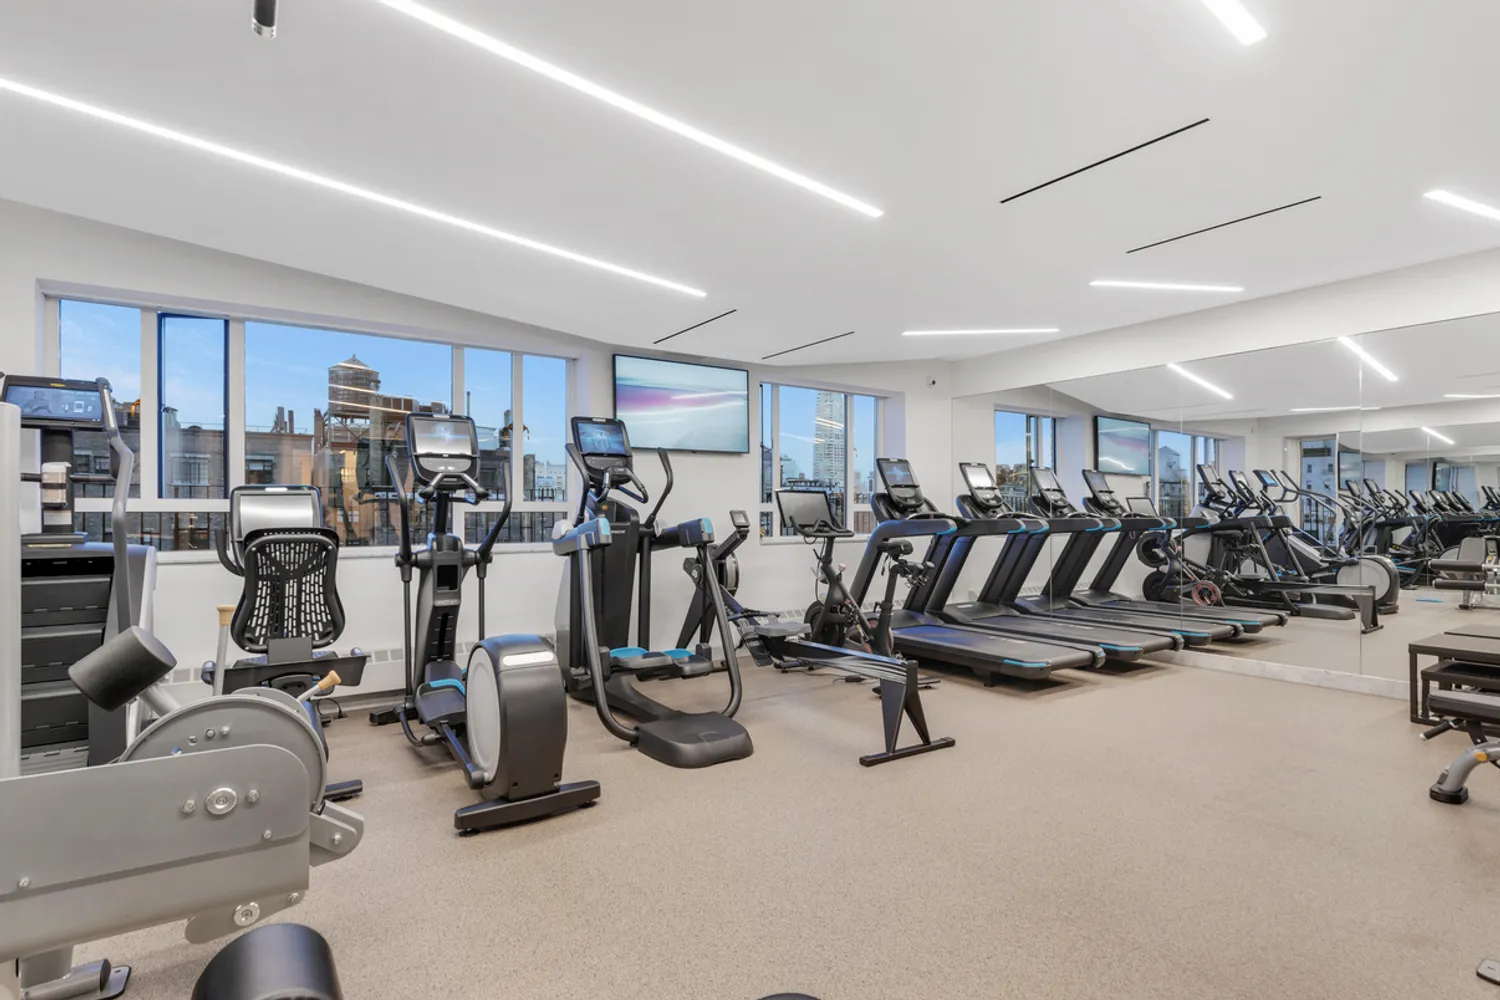 Exceptional gym with views and rooftop terrace